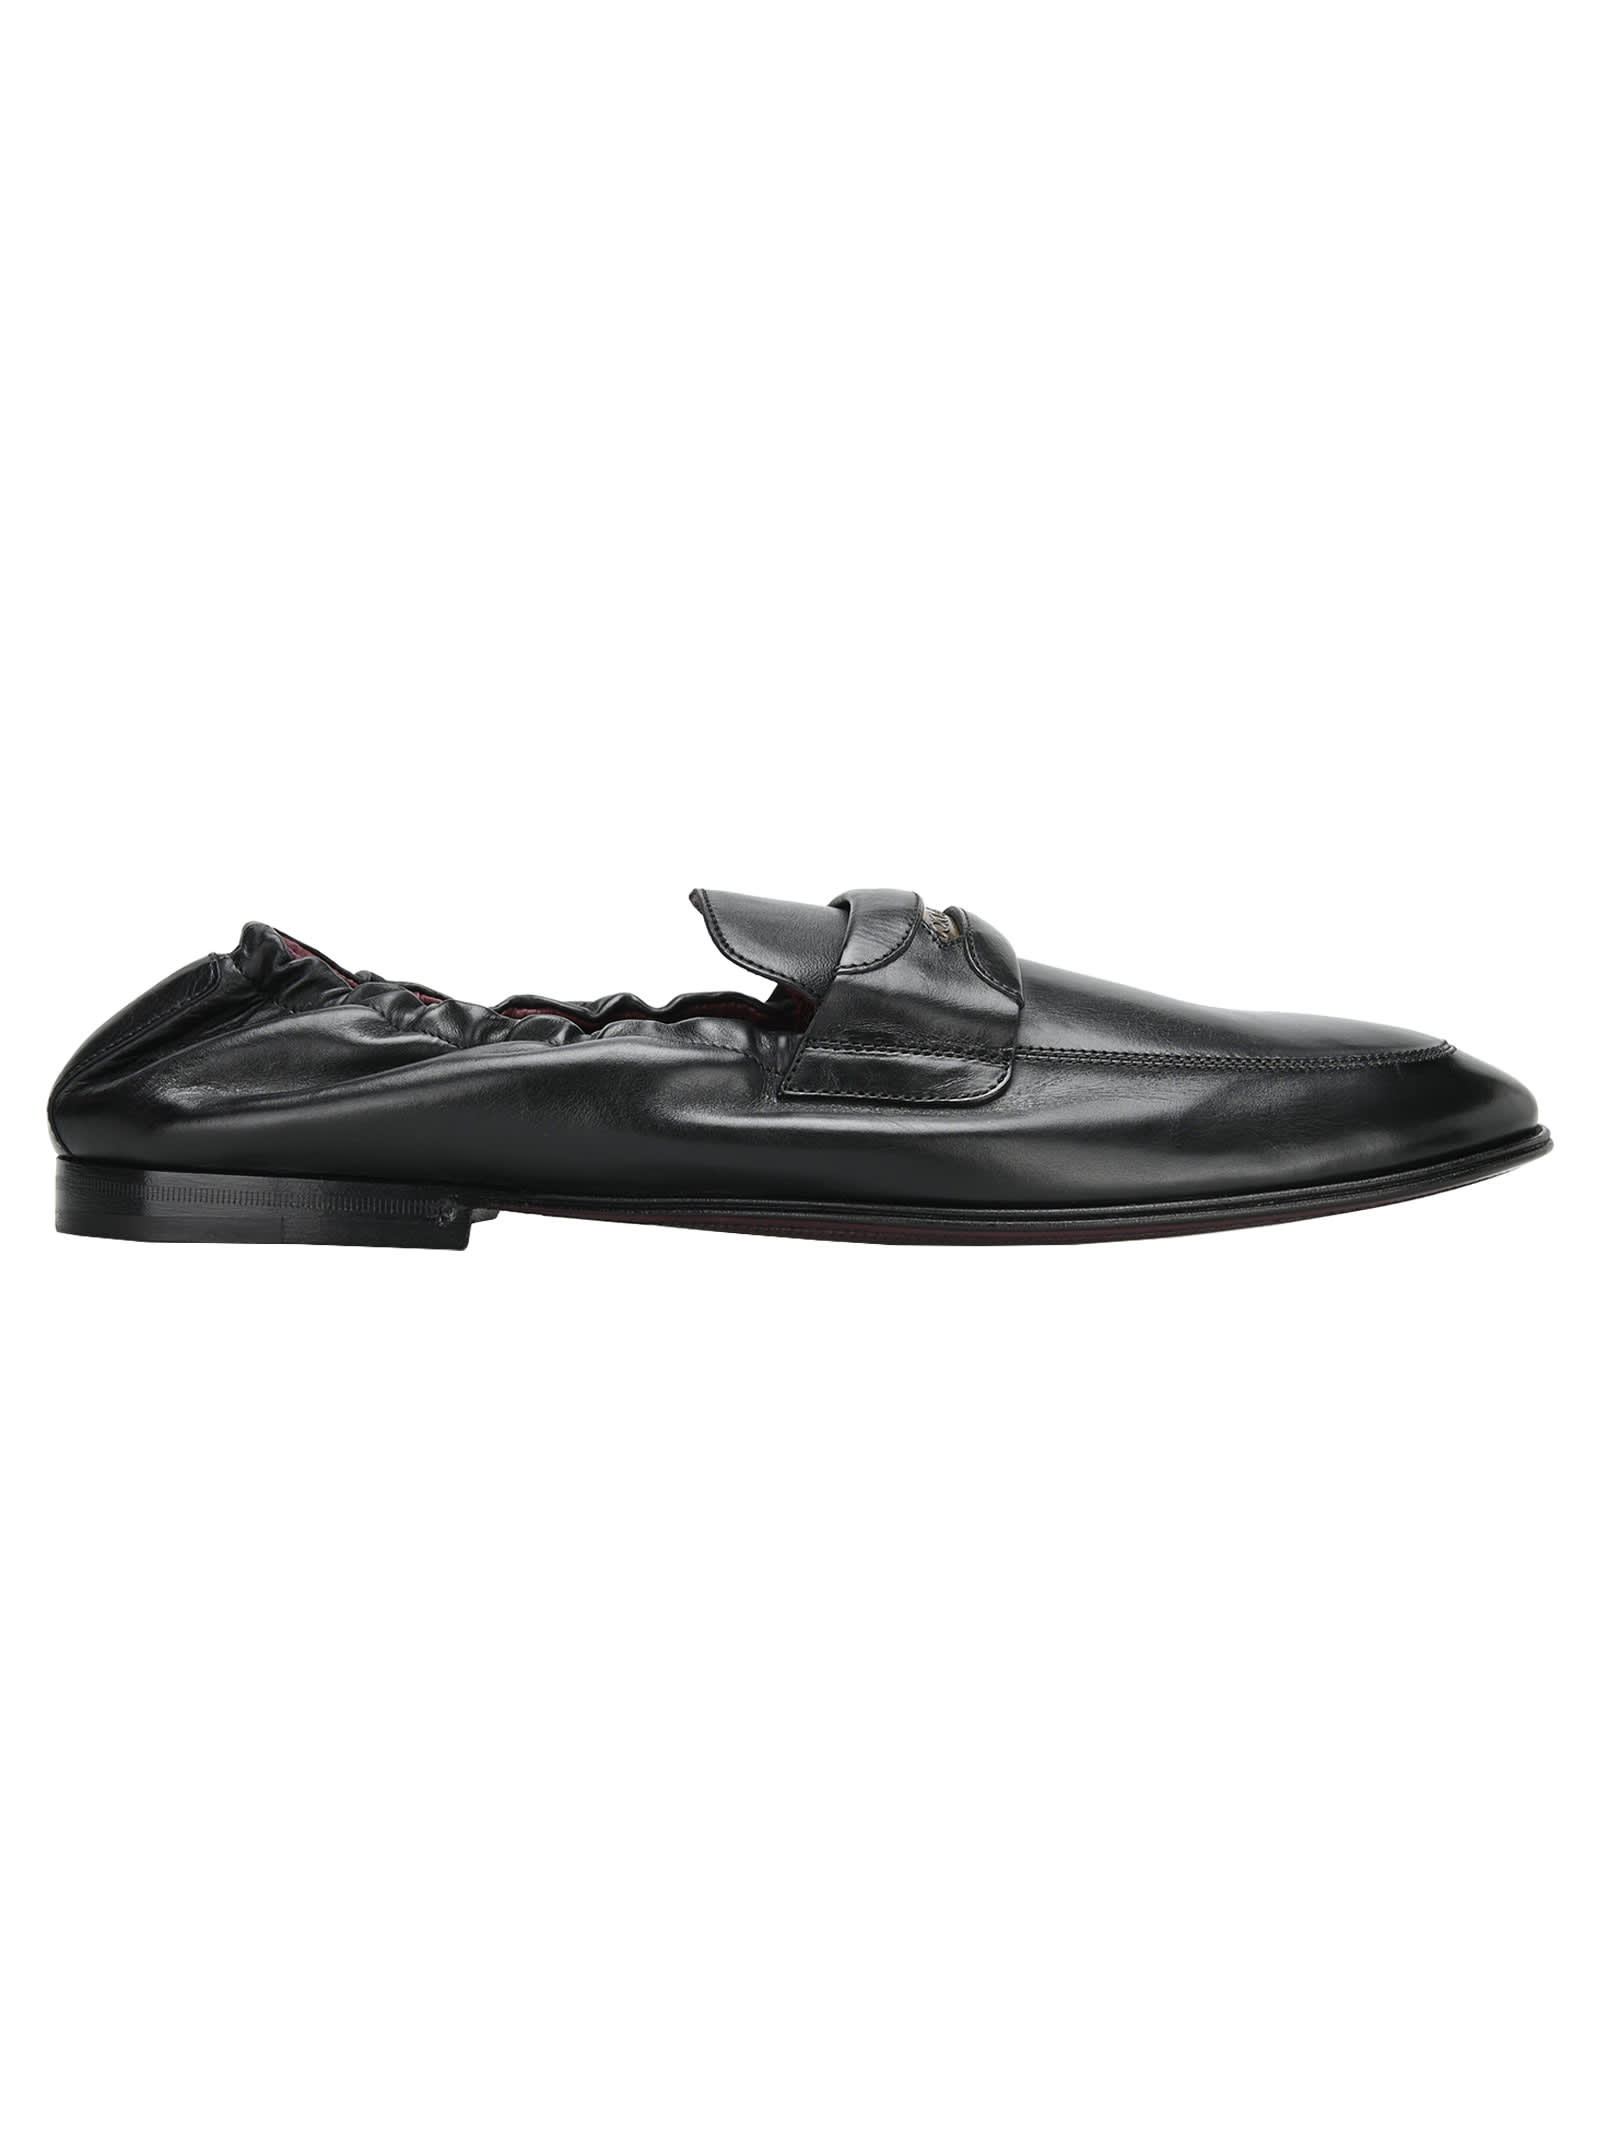 Dolce & Gabbana Dolce & gabbana Logo Plaque Leather Loafers